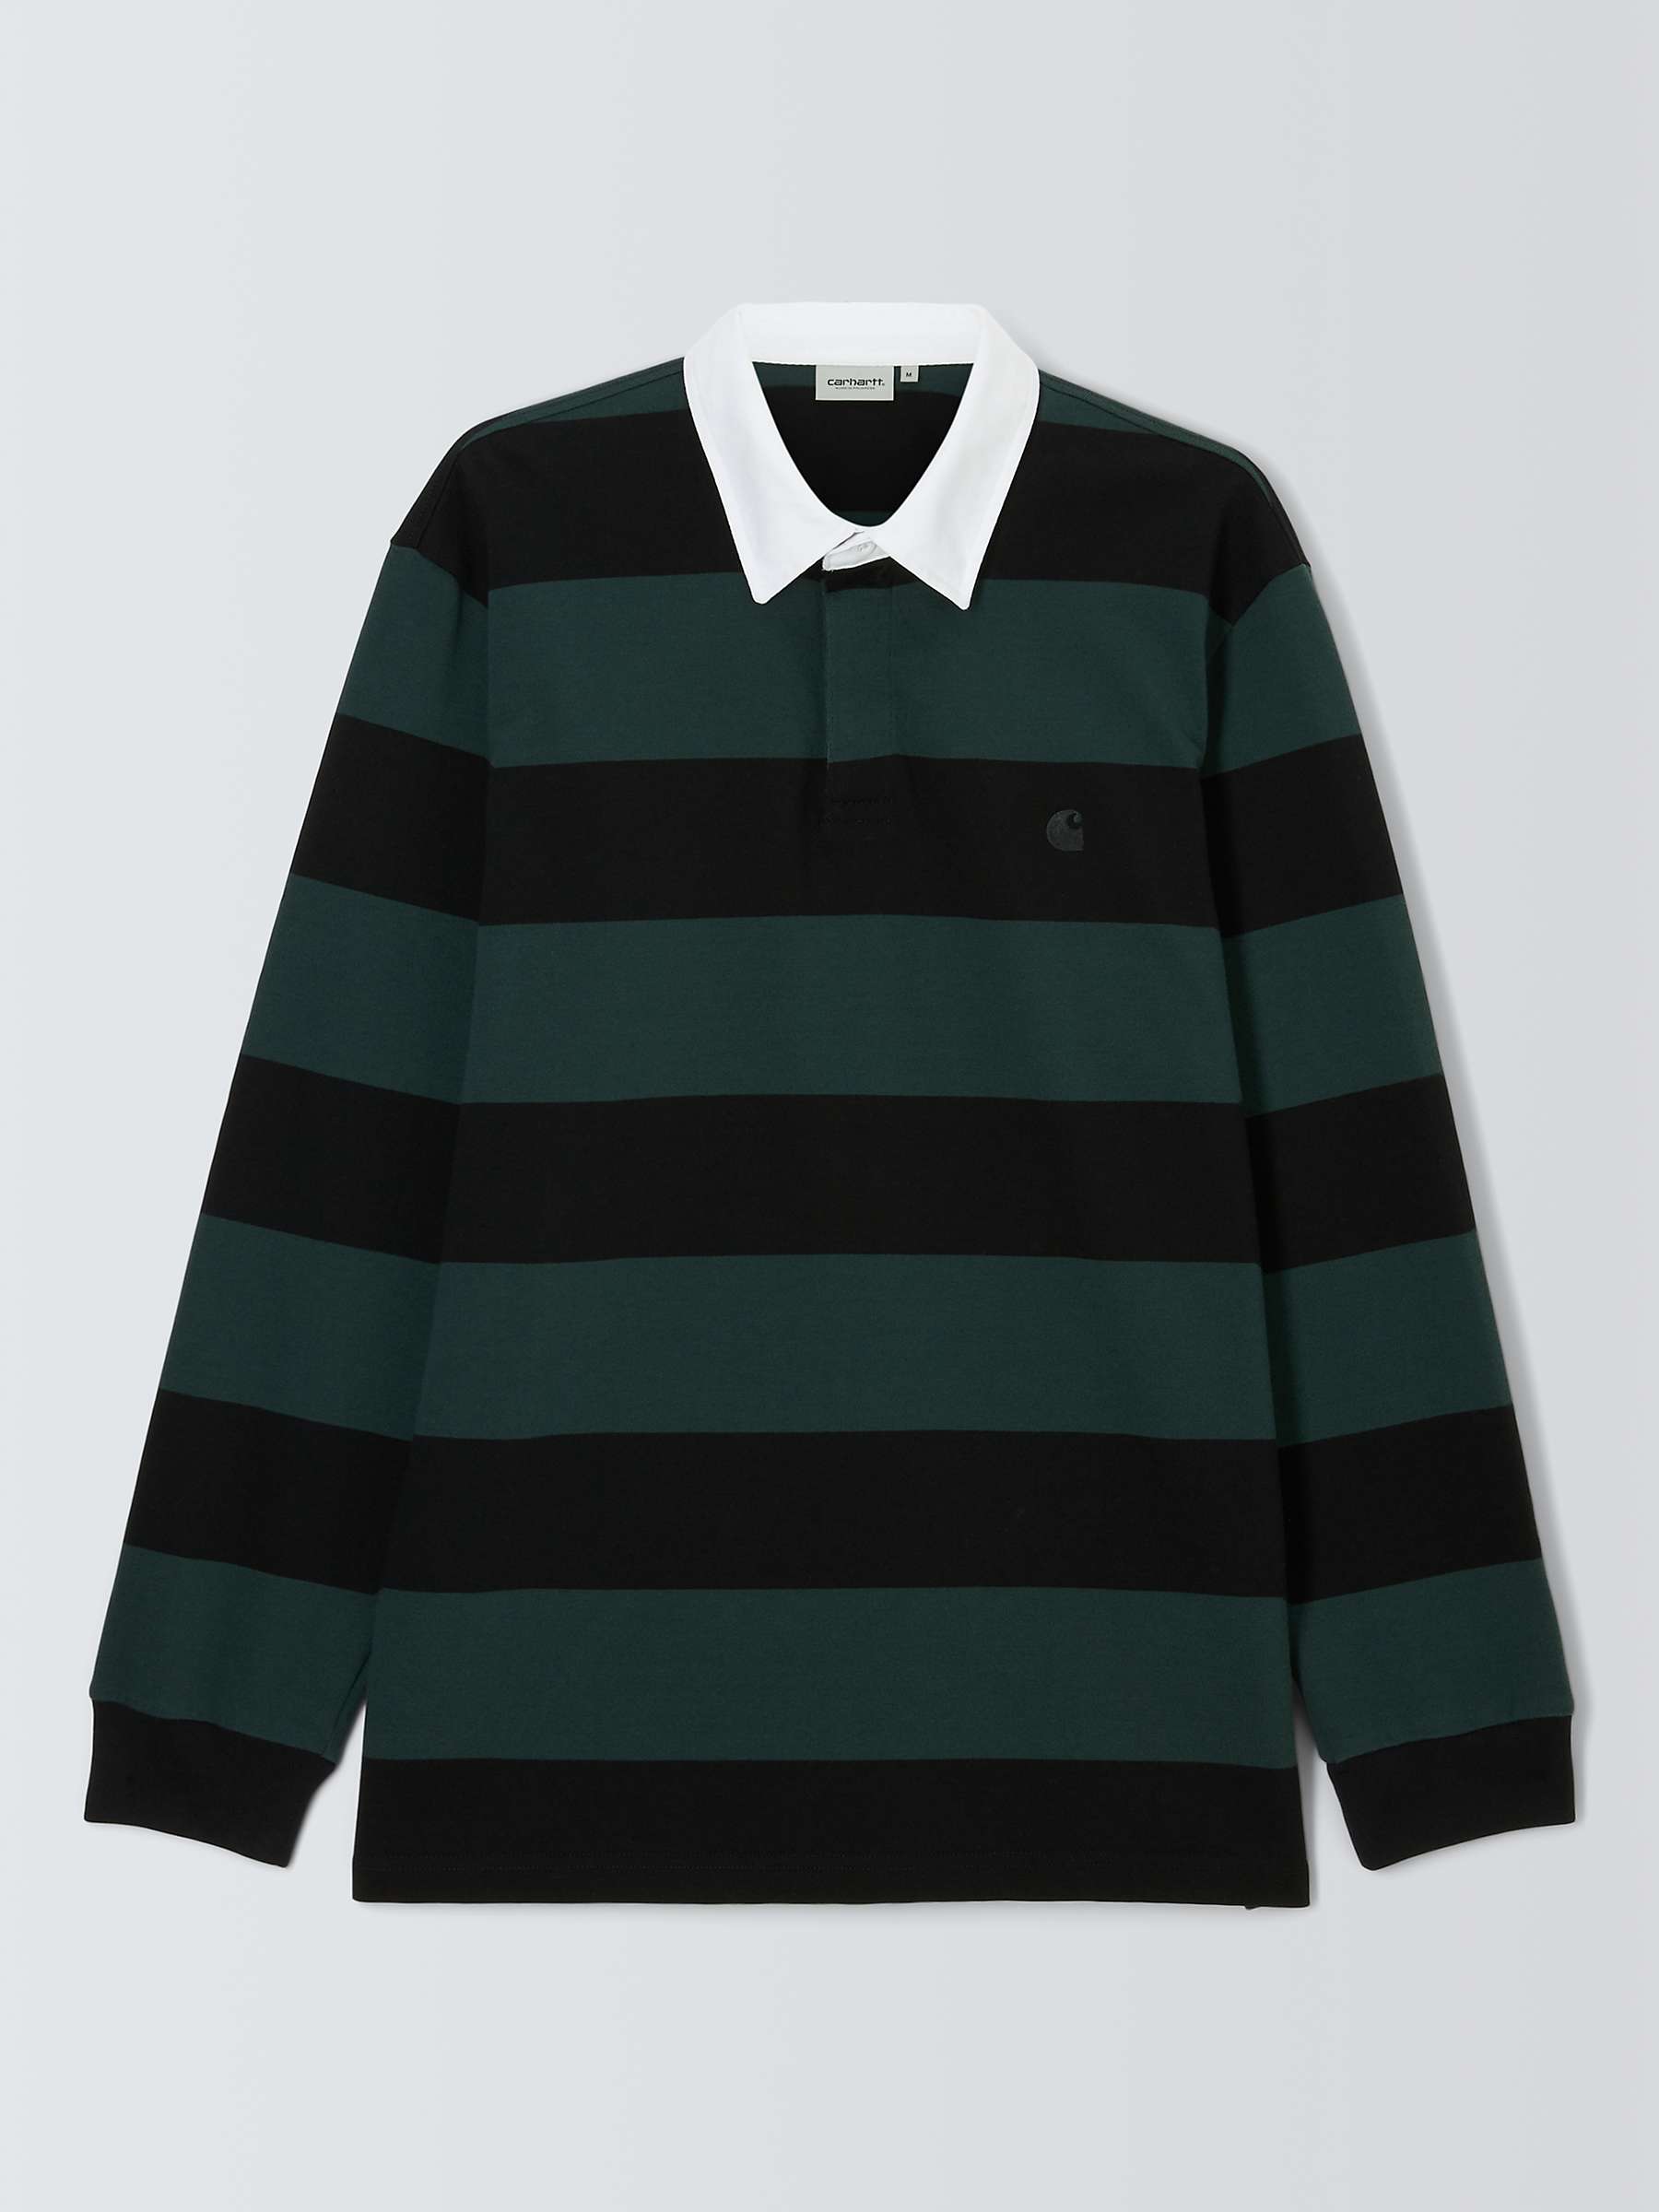 Buy Carhartt WIP Swenson Long Sleeve Rugby Shirt, Green/Navy Online at johnlewis.com